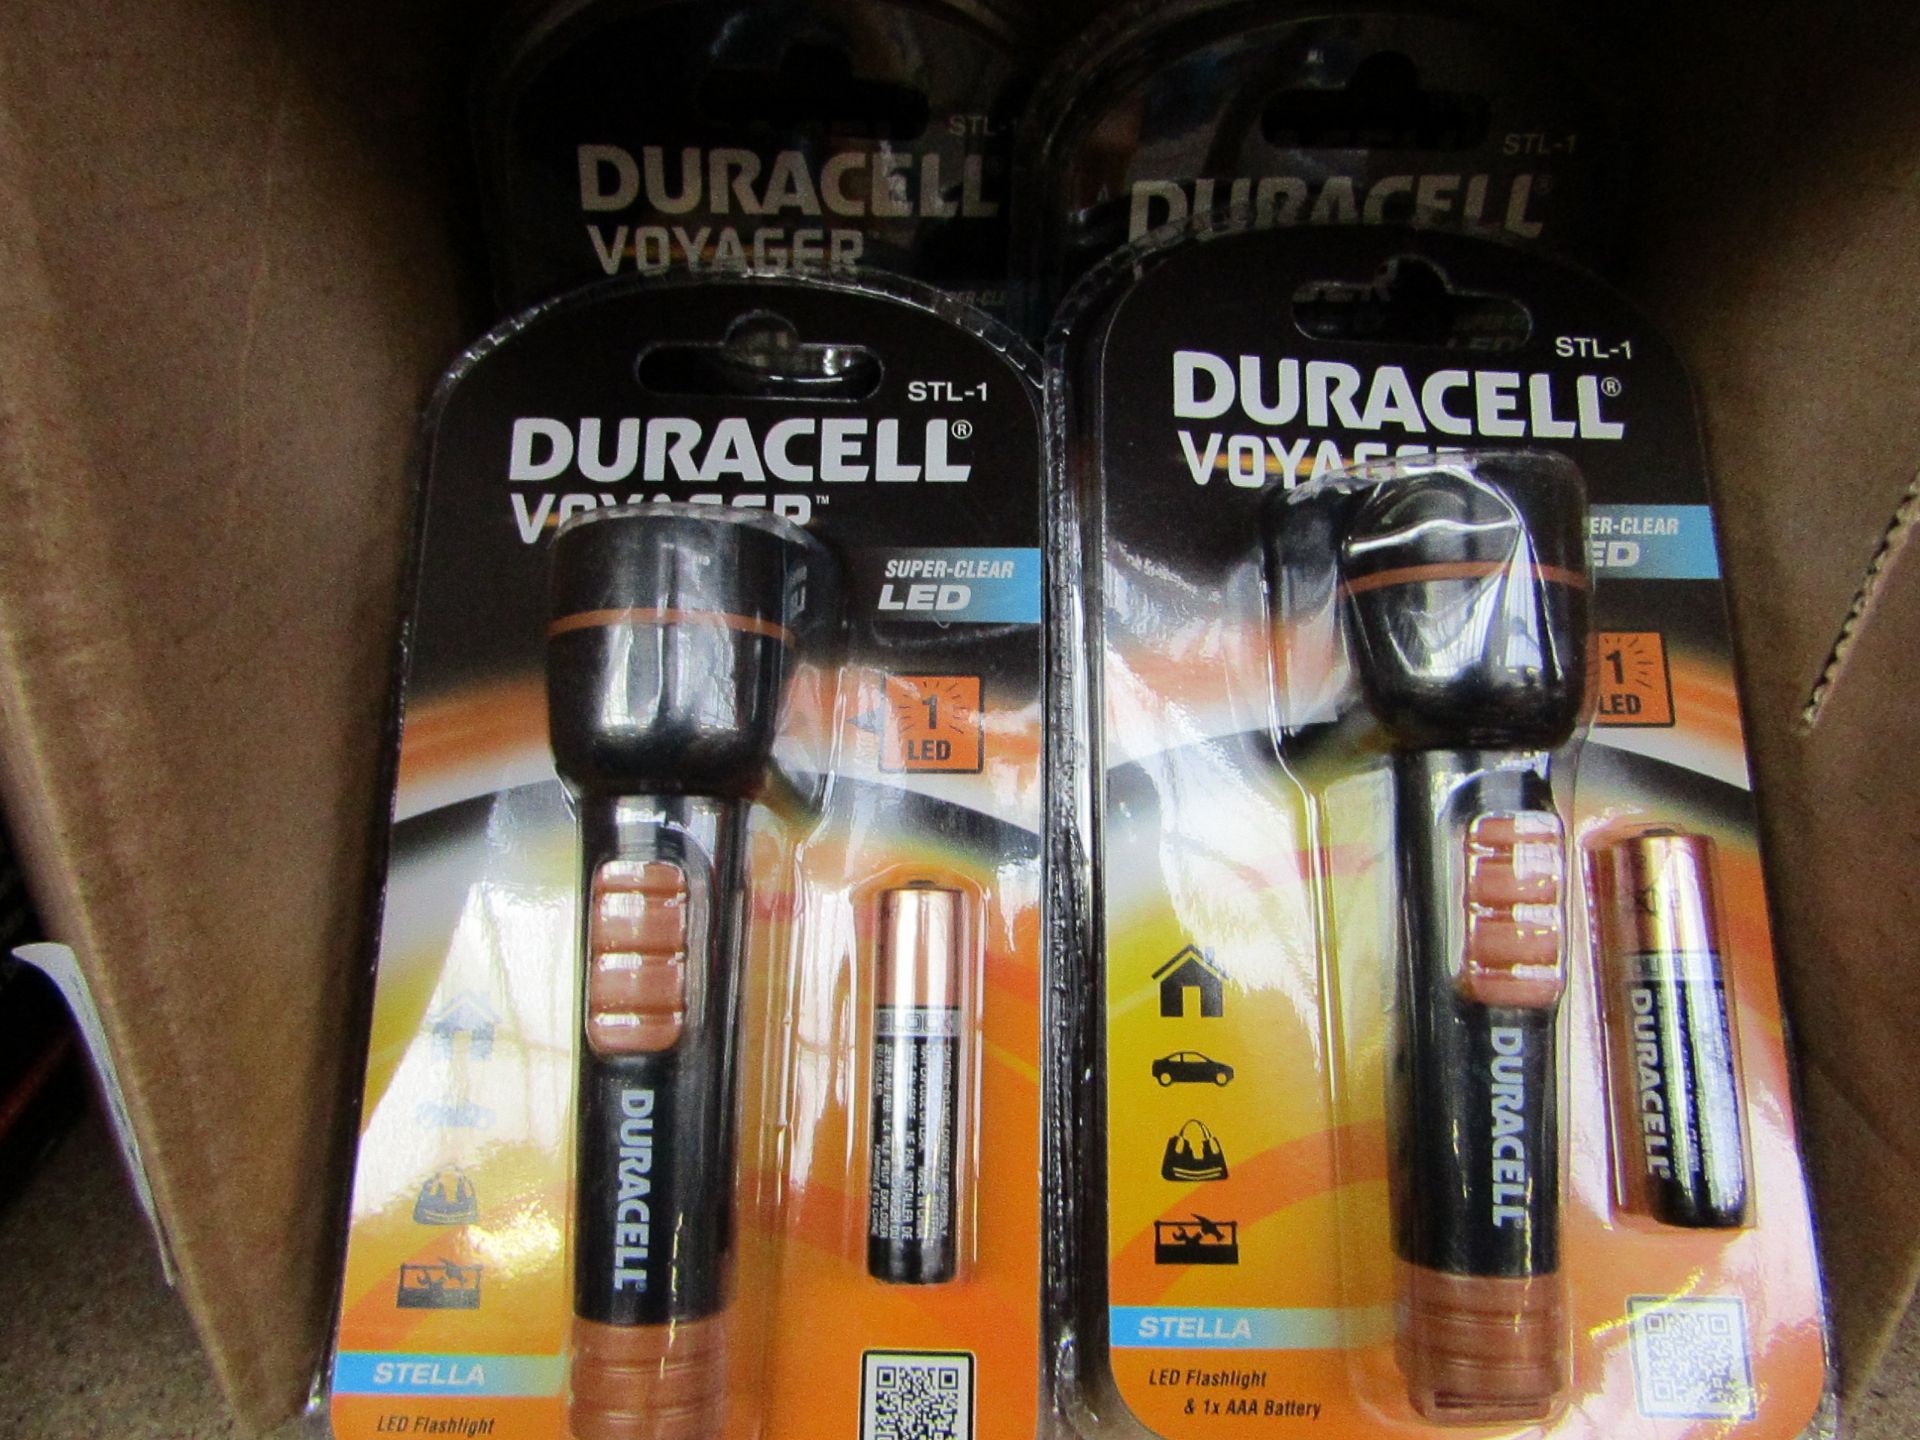 Duracell - Voyager (Super Clear LED) - New & Packaged.